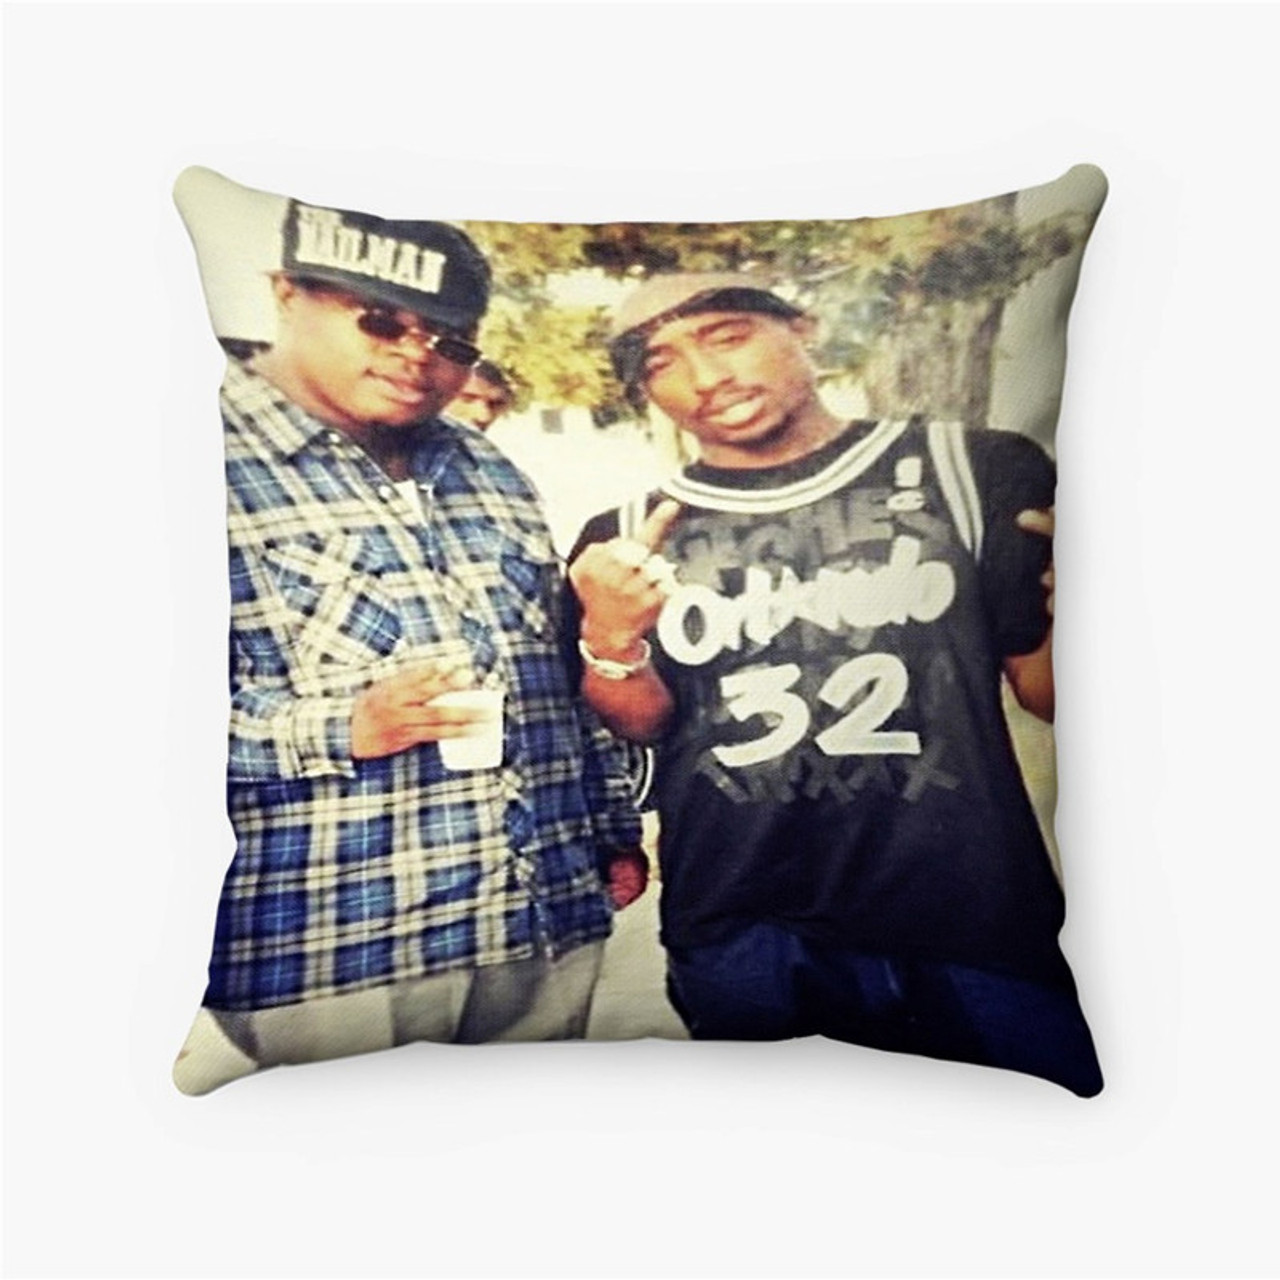 https://cdn11.bigcommerce.com/s-xhmrmcecz5/images/stencil/1280x1280/products/198351/203711/Tupac-Shakur-and-E-40-Custom-Pillow-Case__32449.1673596571.jpg?c=1